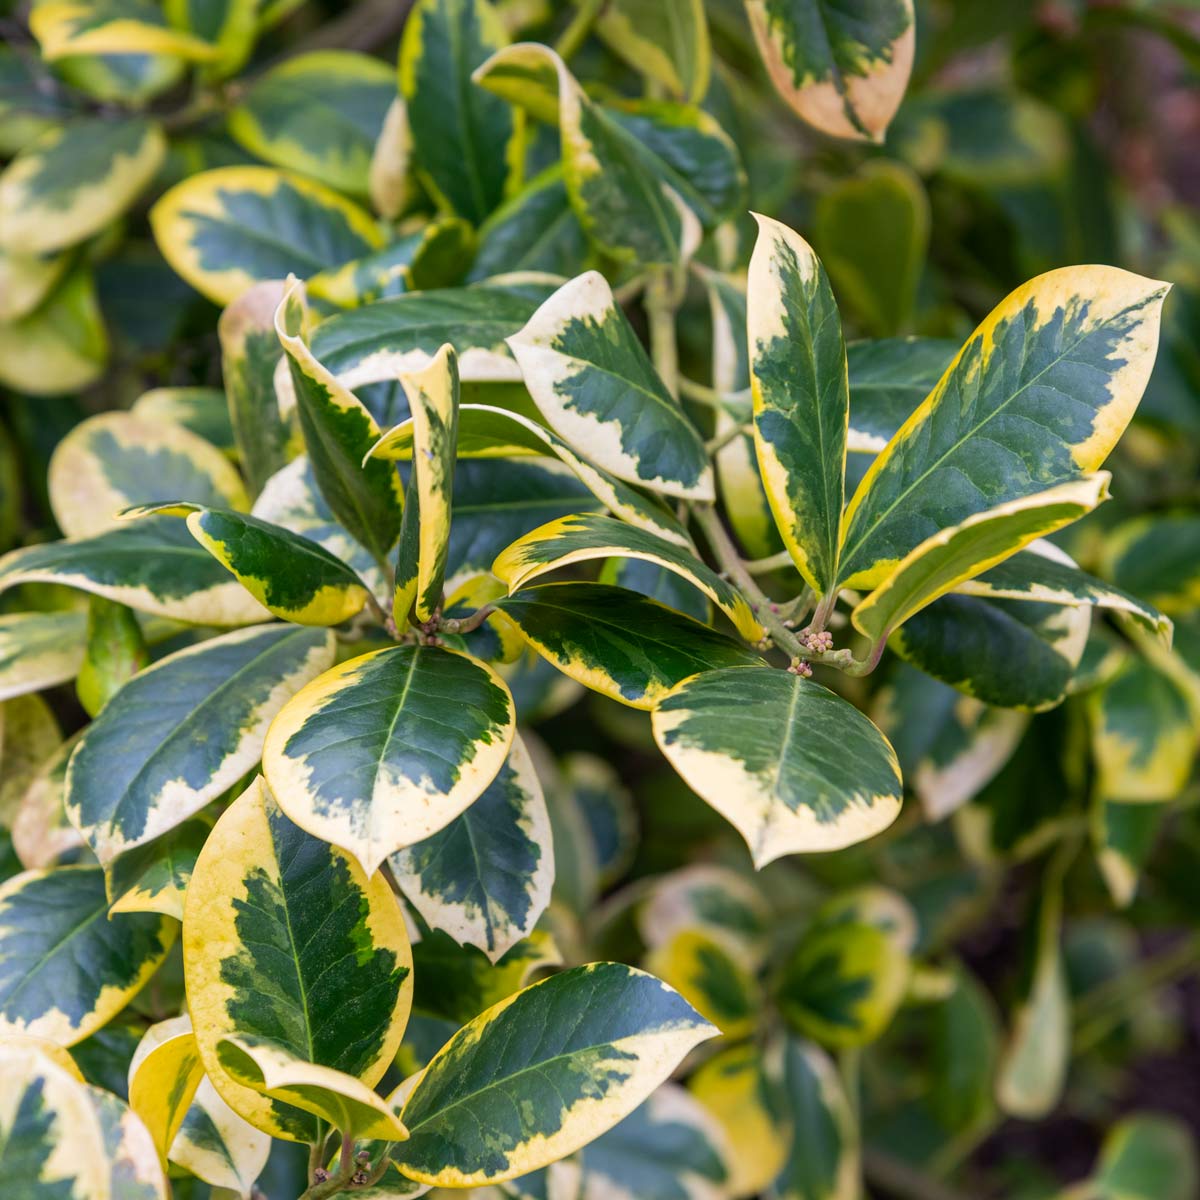 Ilex x altaclerensis 'Golden King' (Holly)